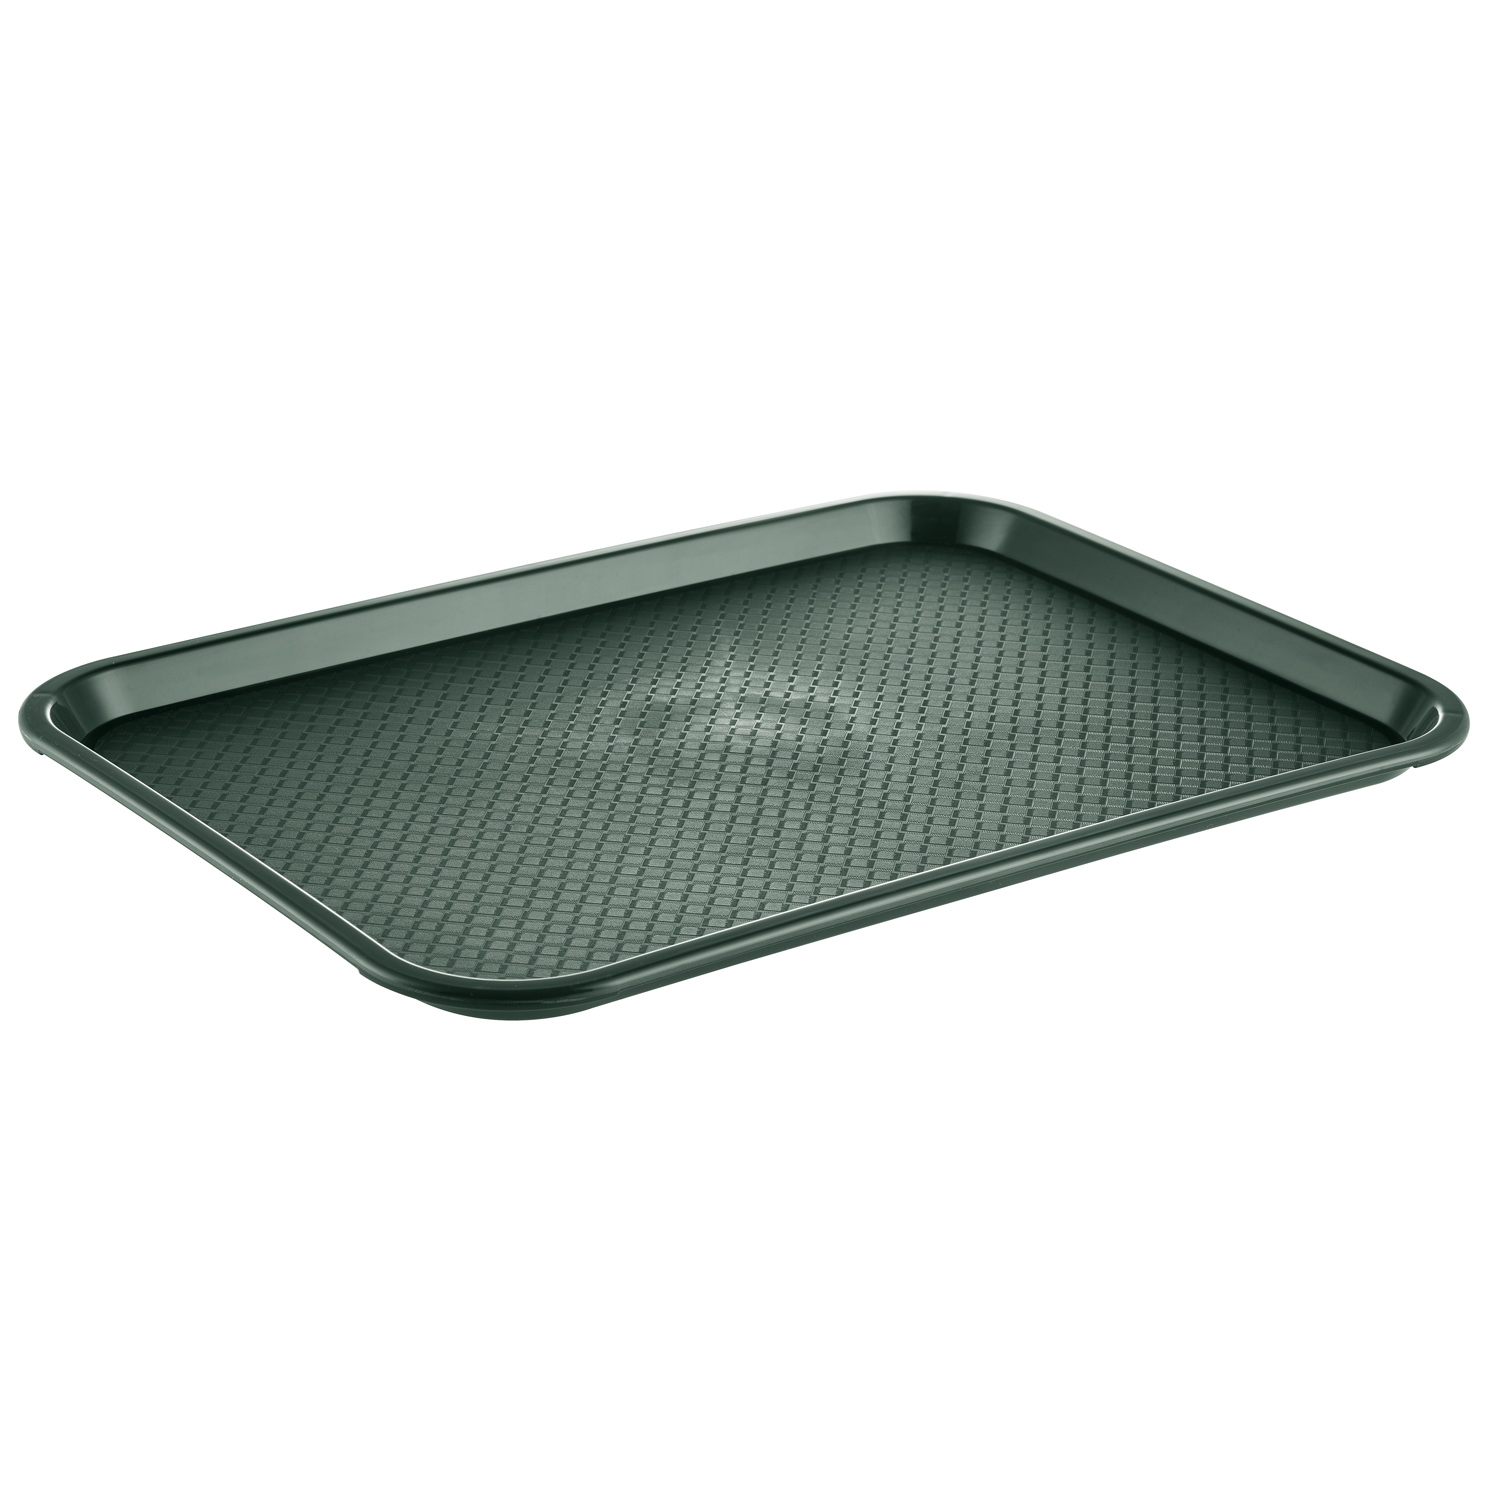 CAC China DSPT-1216G Green Fast Food/Cafeteria Tray, 16" x 12"